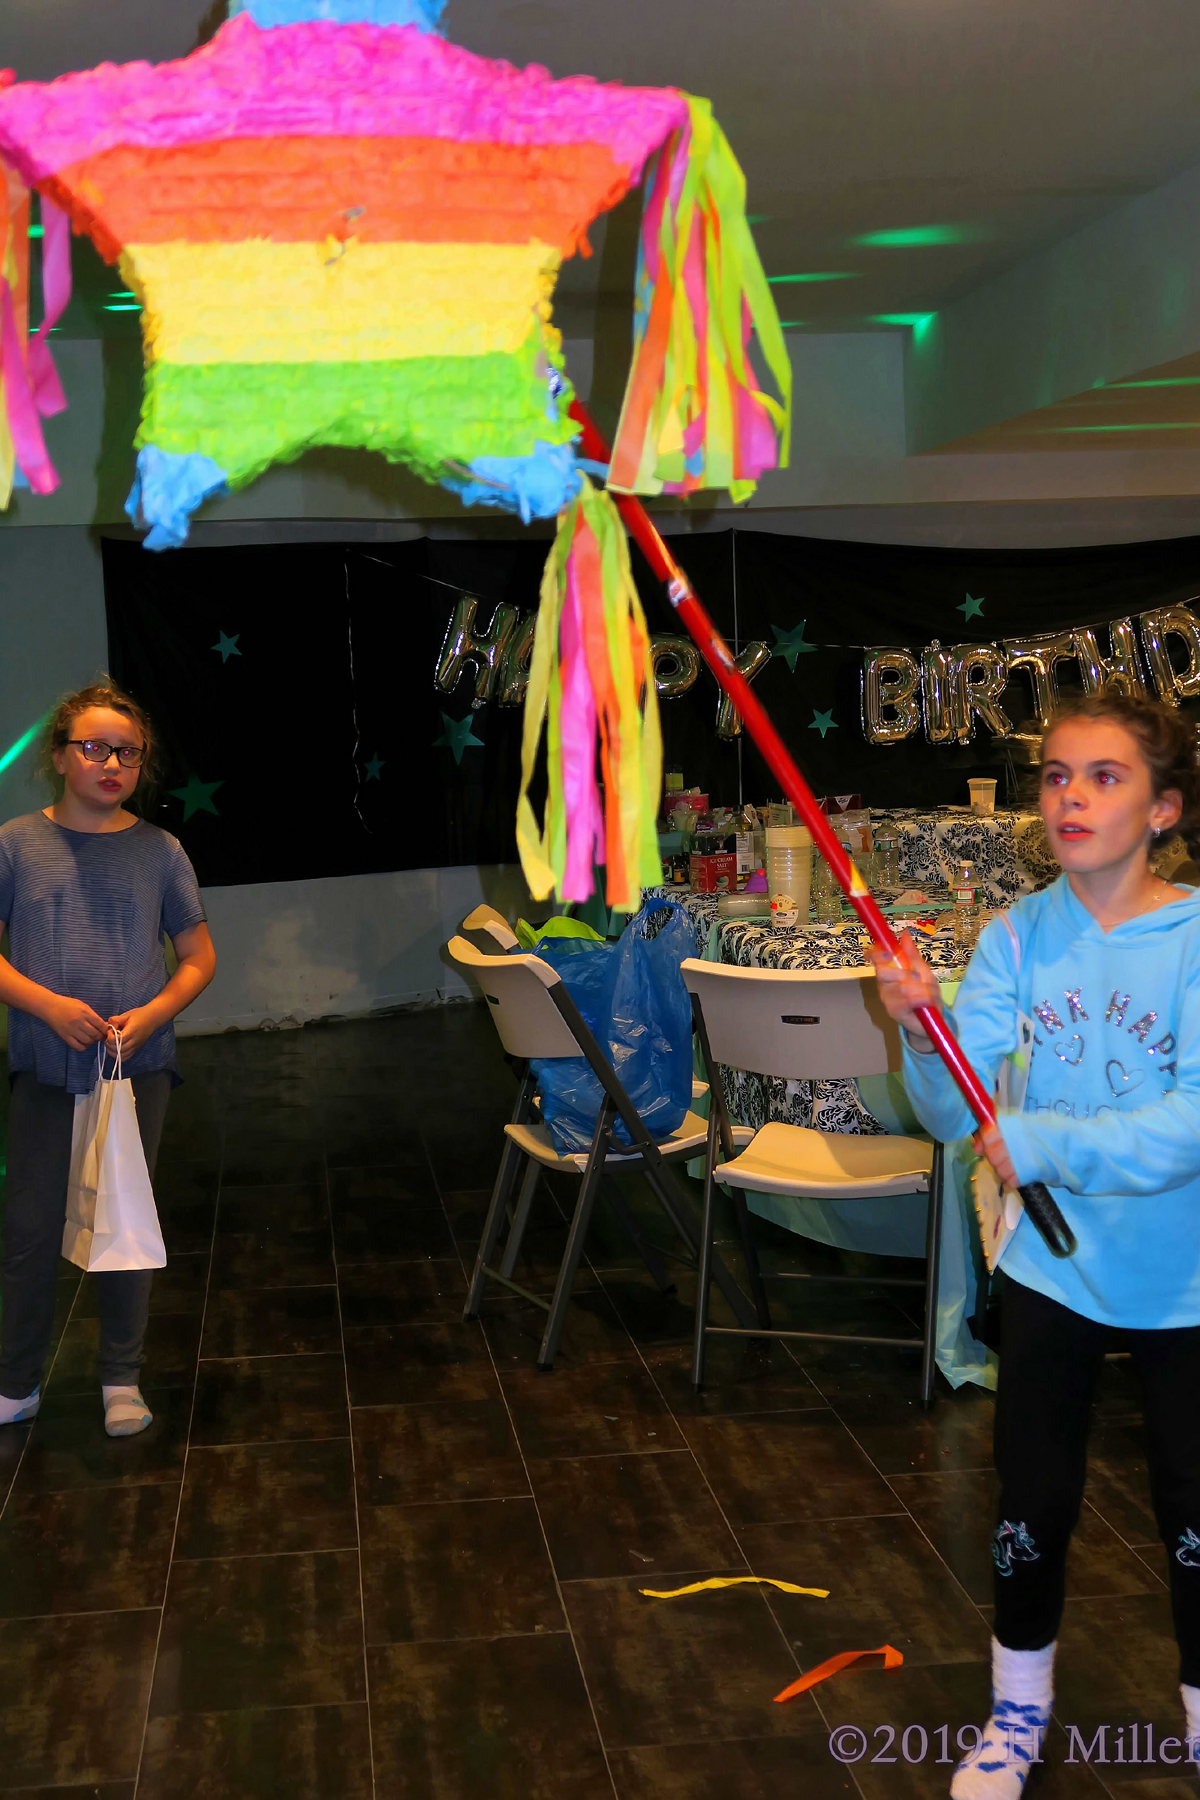 Sticking The Stickler! Kids Pinata Fun At The Kids Spa Party! 1